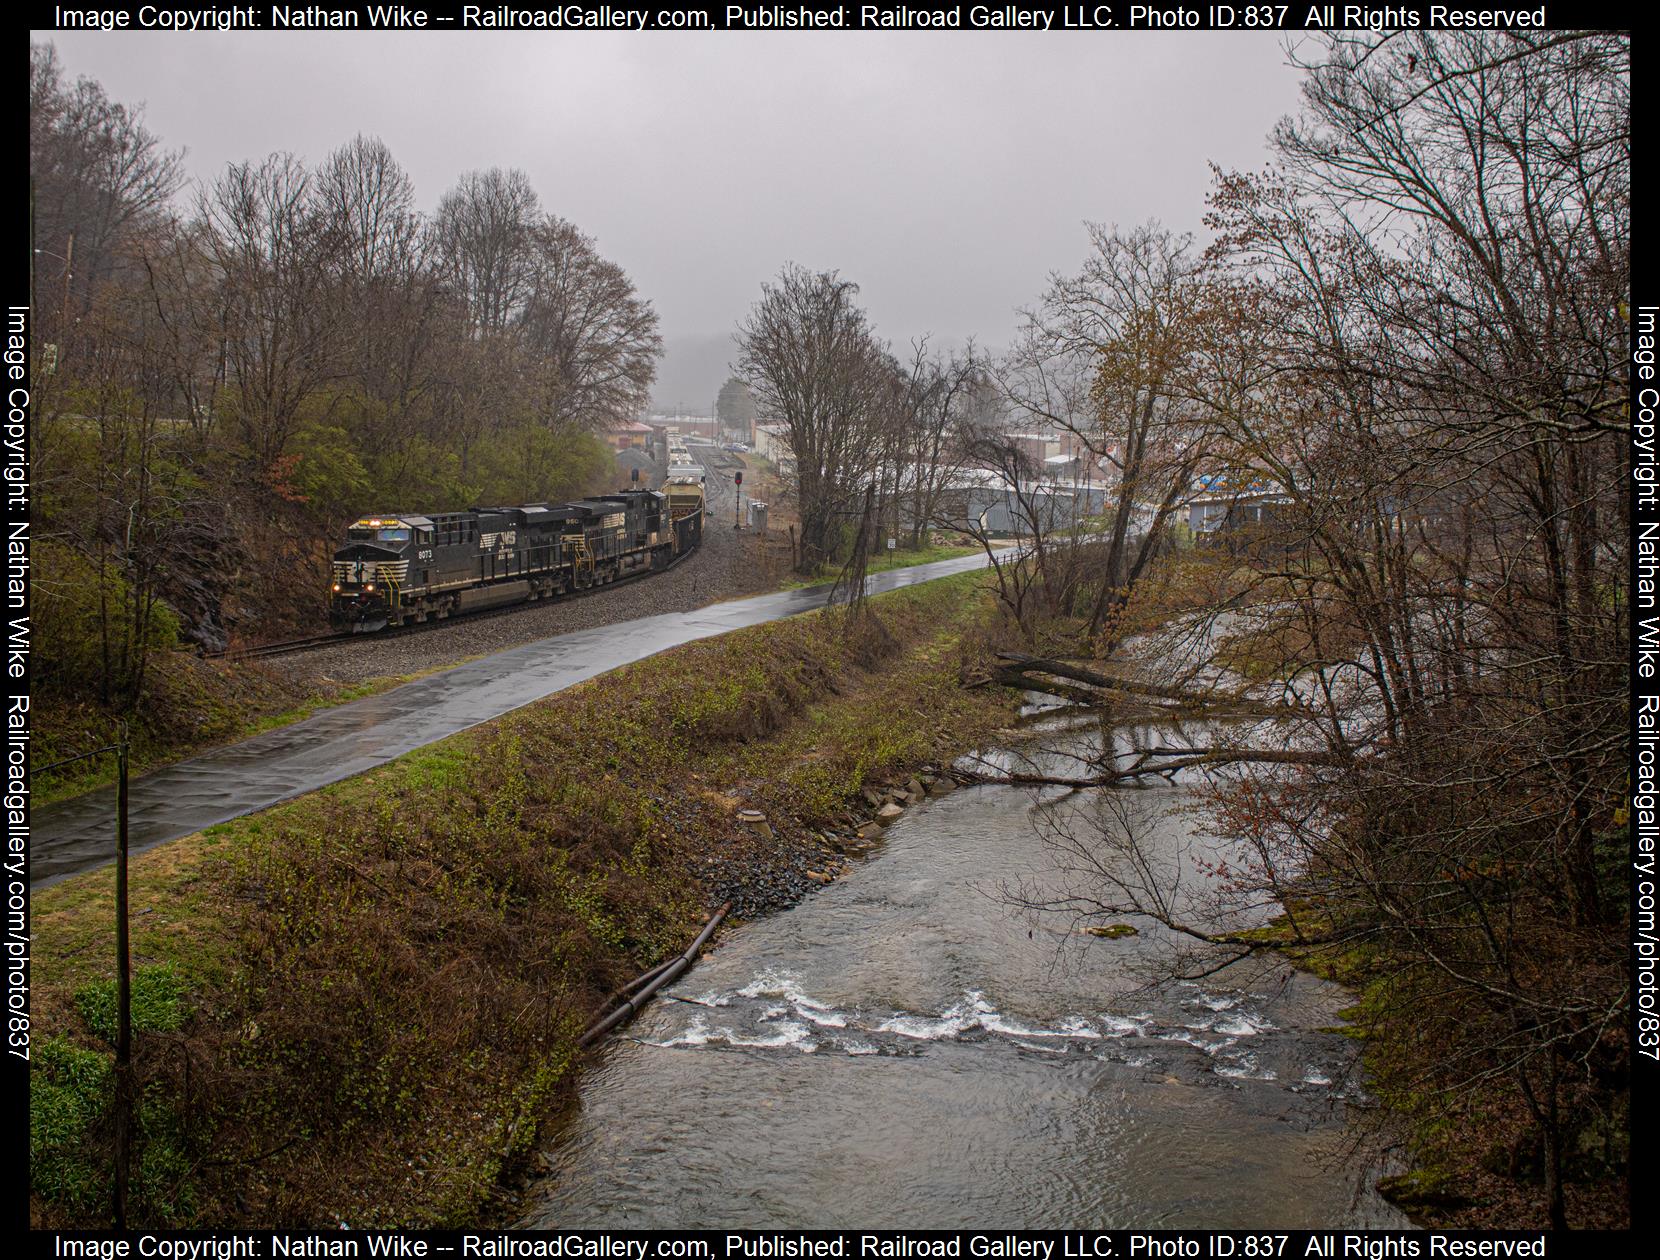 NS 8037 is a class ES44AC and  is pictured in Old Fort, North Carolina, United States.  This was taken along the Asheville District  on the Norfolk Southern. Photo Copyright: Nathan Wike uploaded to Railroad Gallery on 03/12/2023. This photograph of NS 8037 was taken on Sunday, March 12, 2023. All Rights Reserved. 